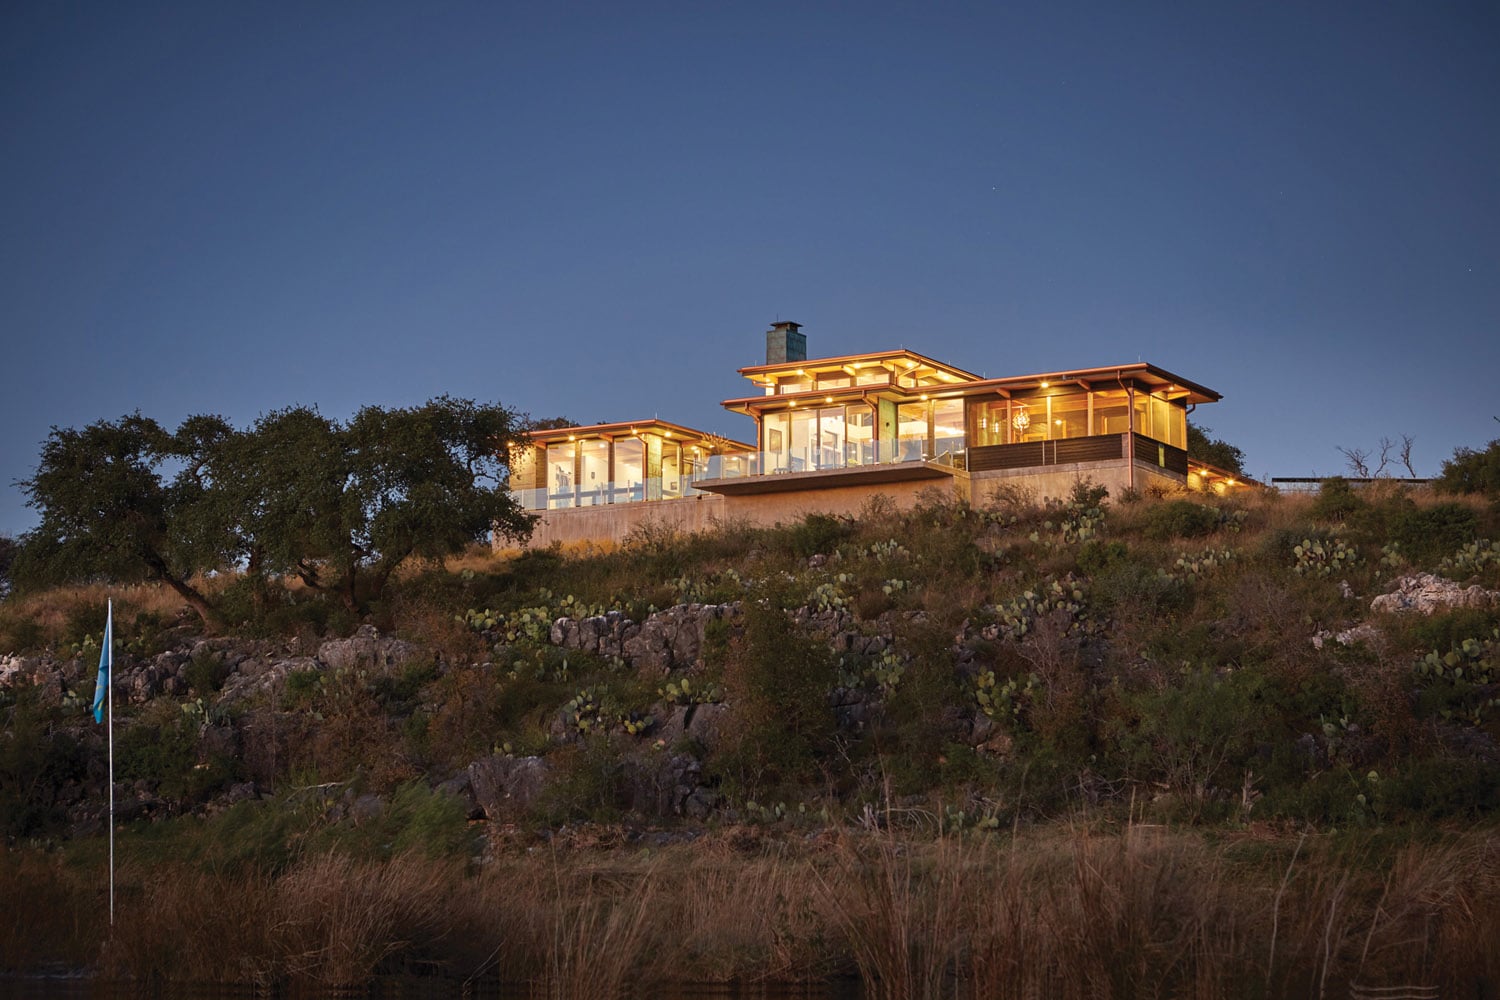 Jeff Derebery’s custom Lindal Hestia home in the Texas Hill Country, Johnson City